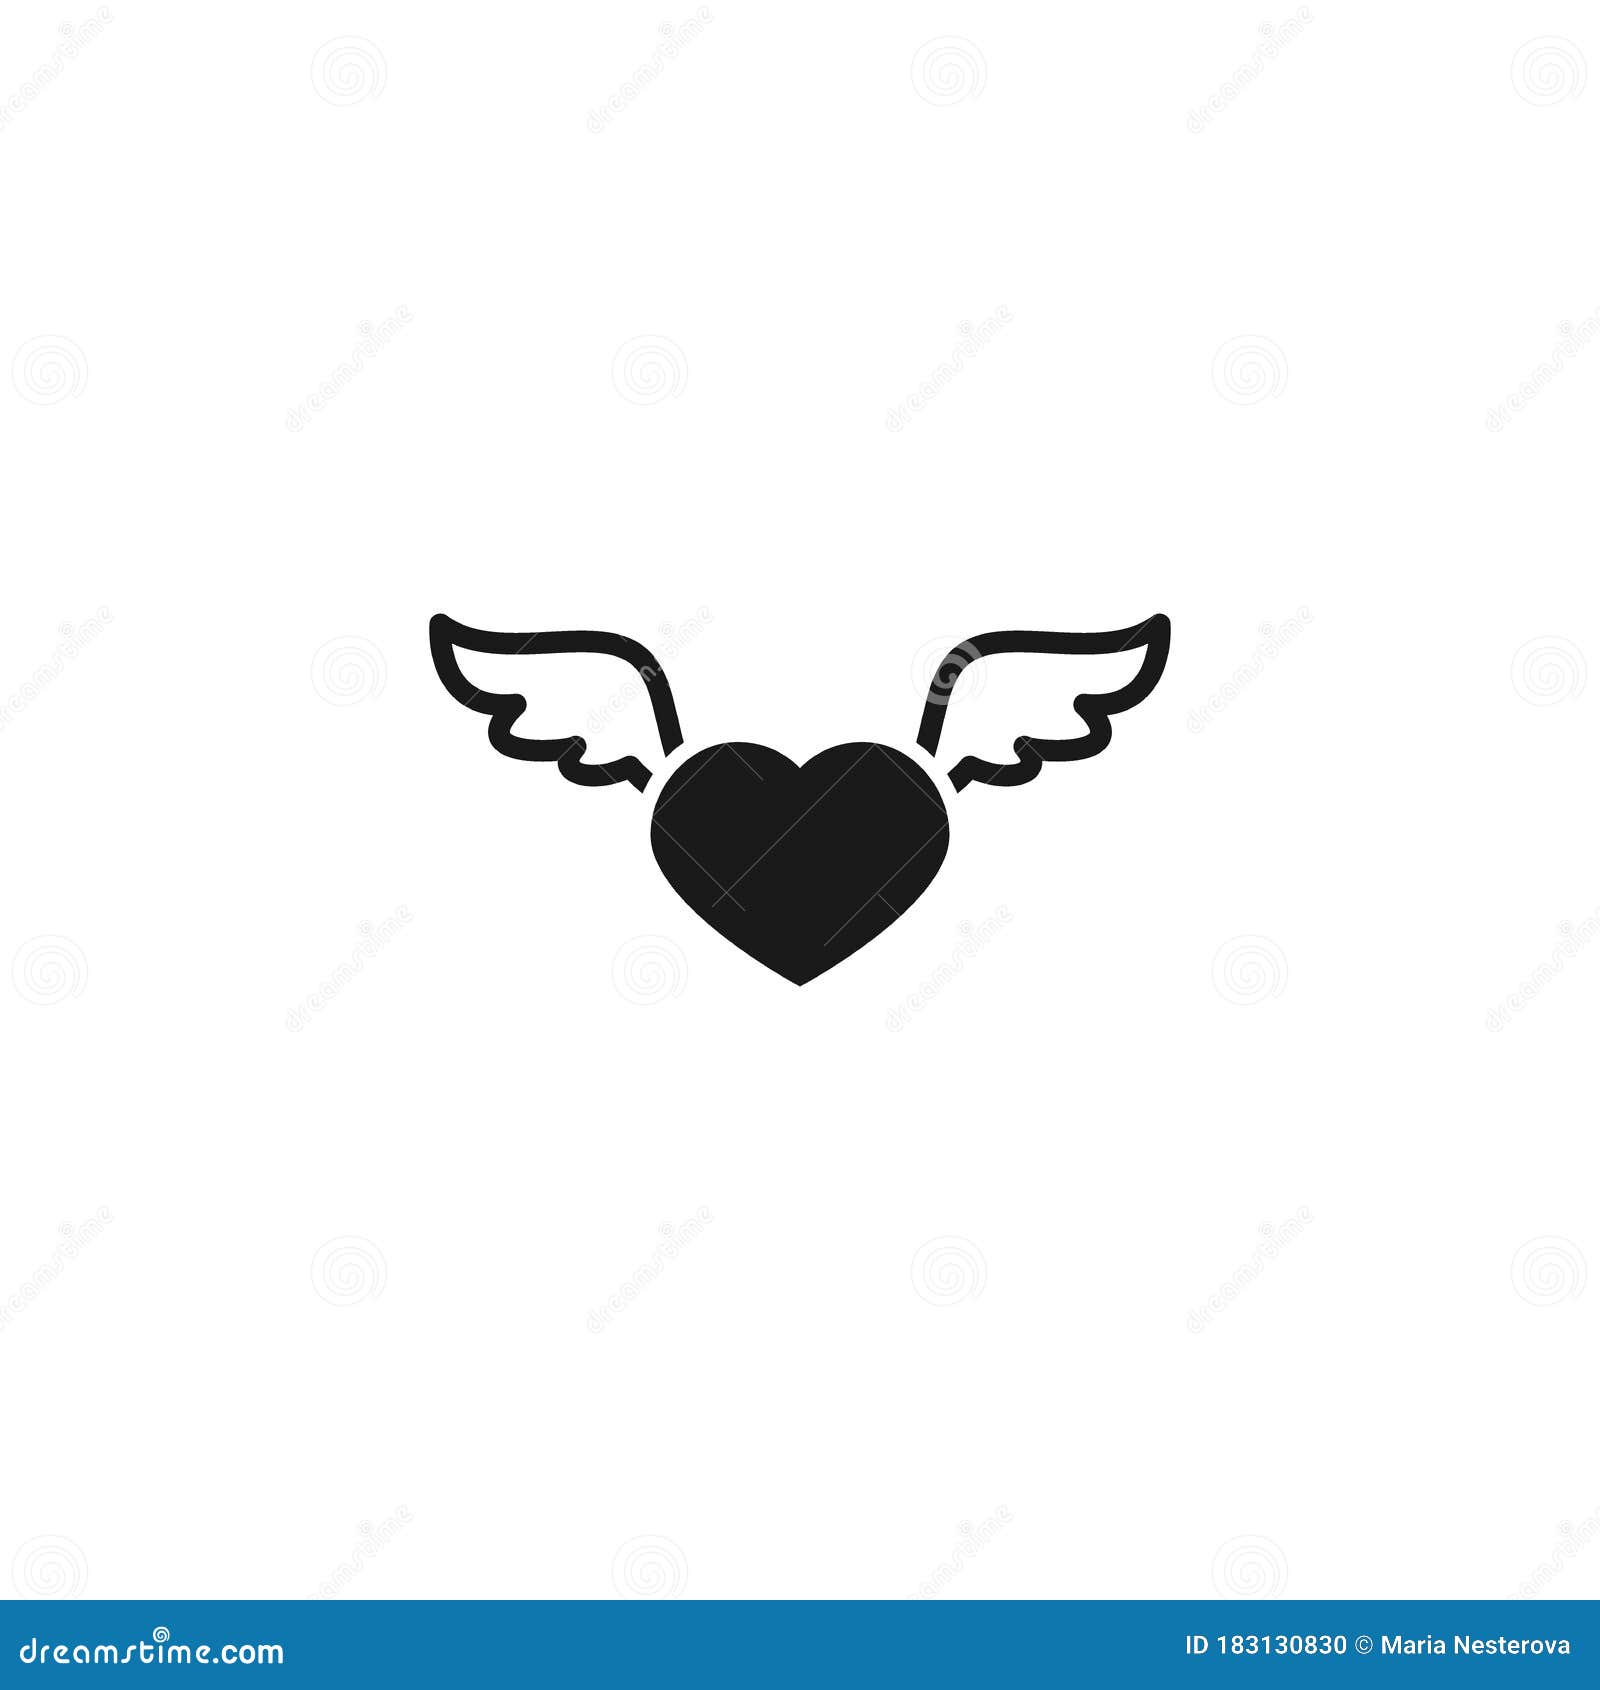 Flat Black Heart with Wings Isolated on White Background. Love ...